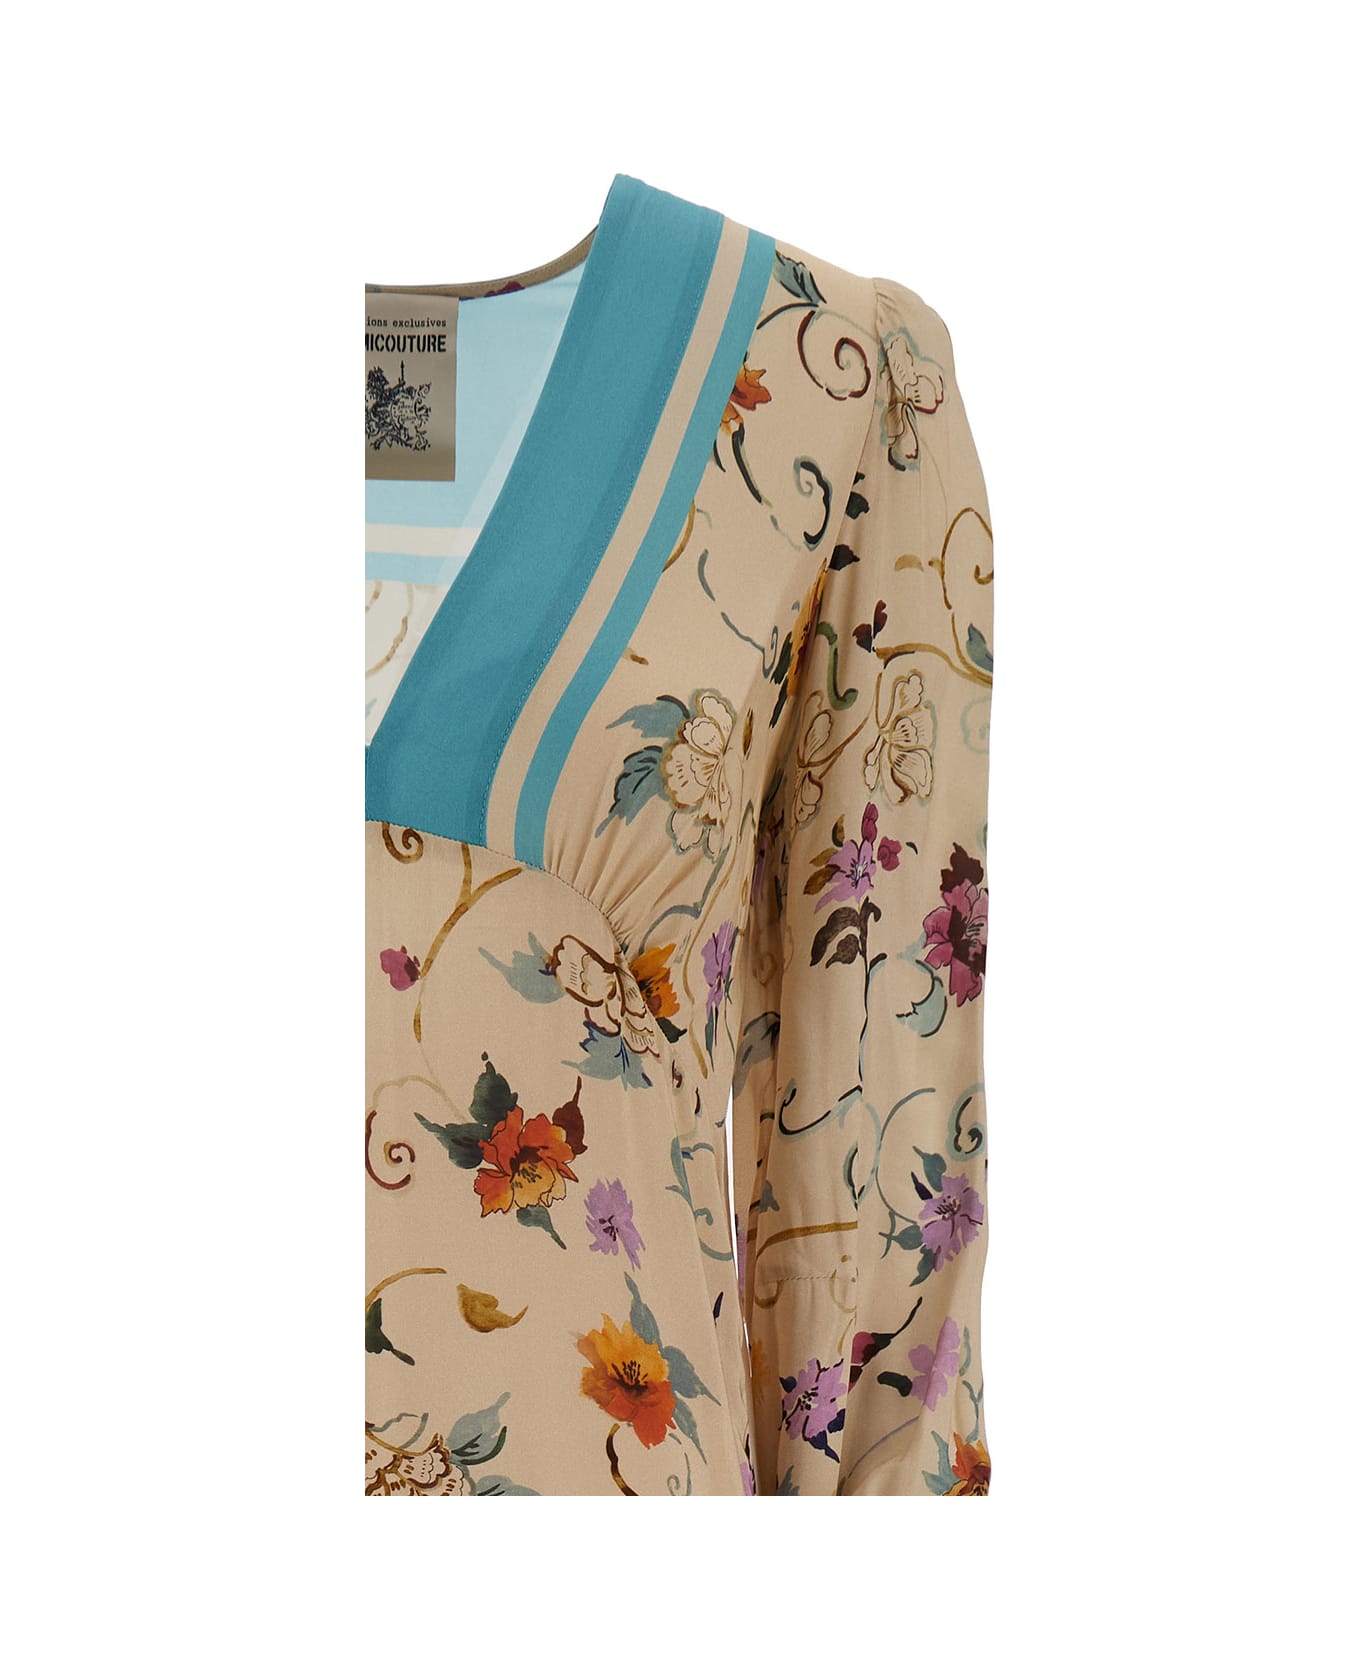 SEMICOUTURE 'giovanna' Long Light Blue And Beige Dress With Floreal Print In Viscose Woman - Multicolor ワンピース＆ドレス